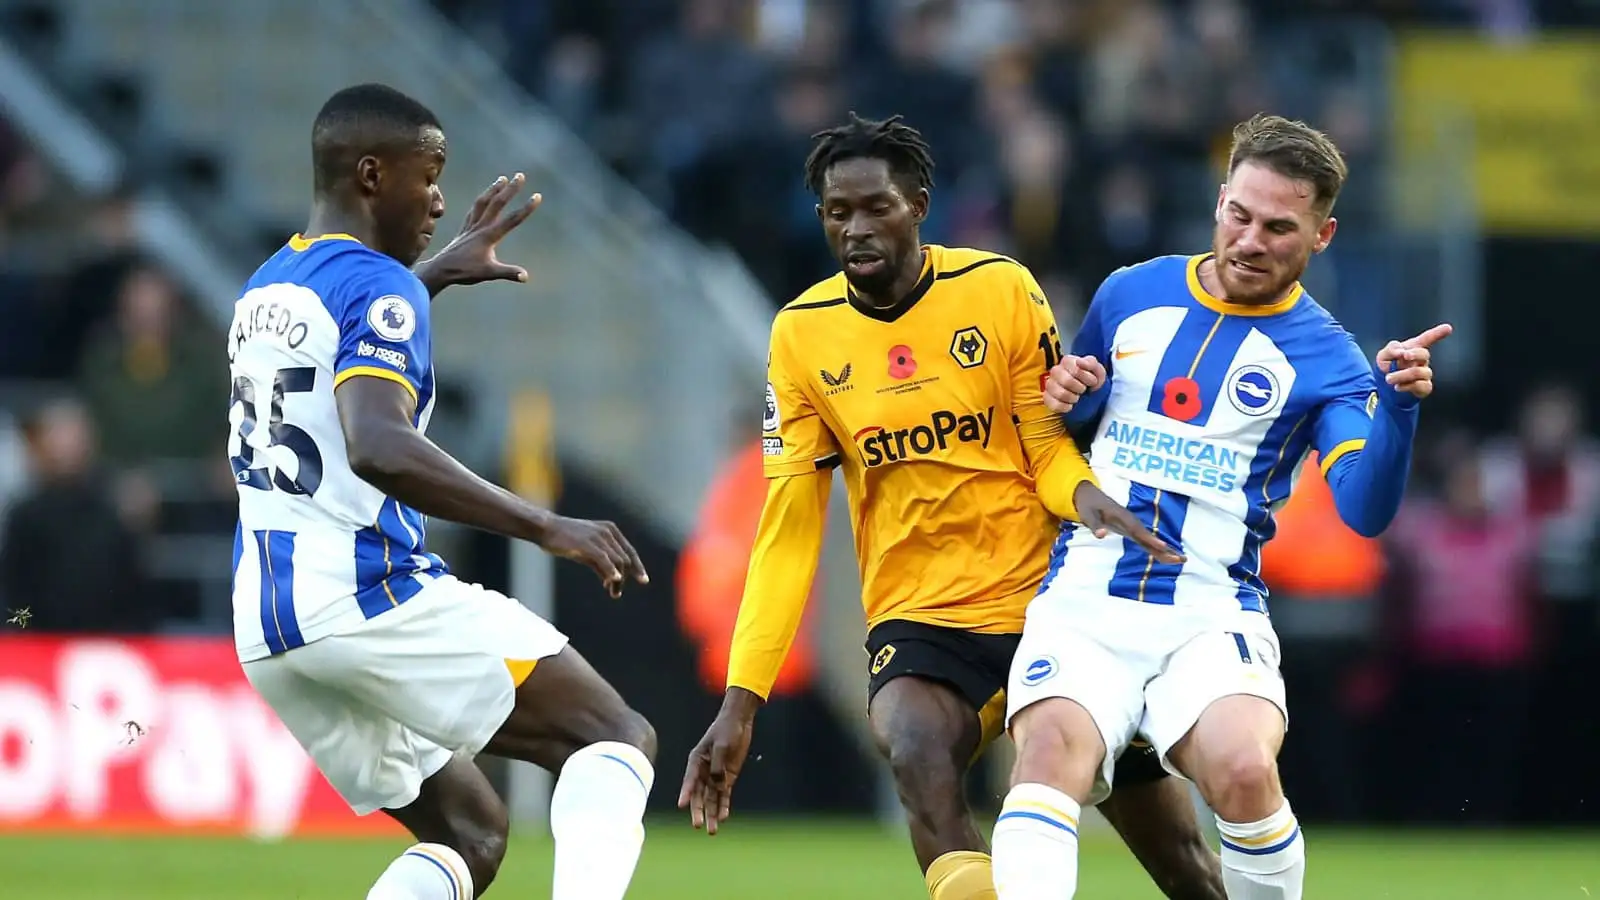 Brighton stars Moises Caicedo and Alexis Mac Allister playing against Wolves